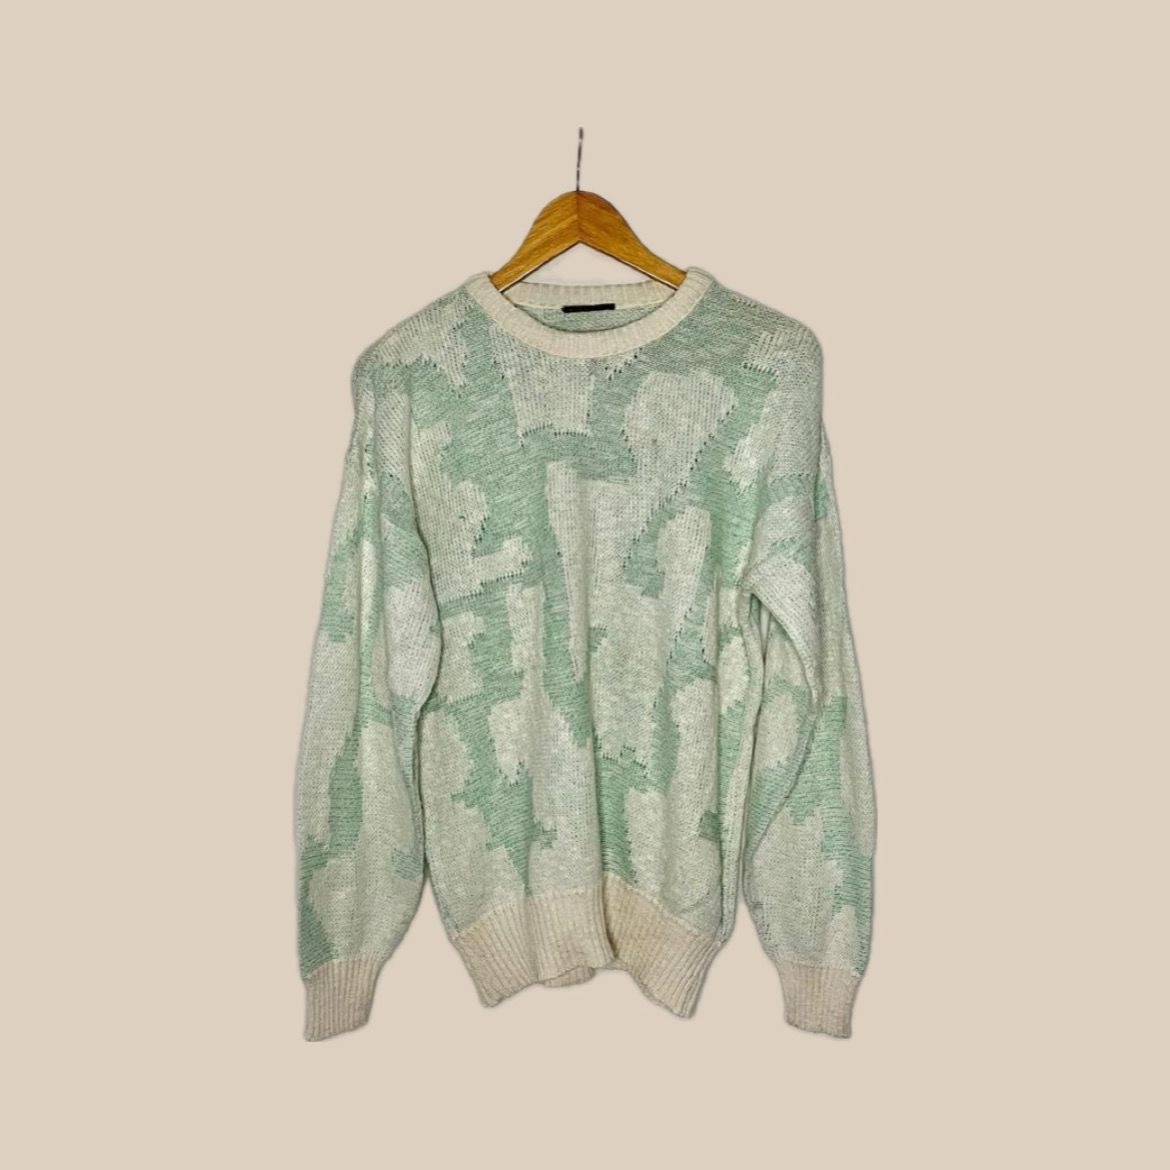 Vintage green and white sweater